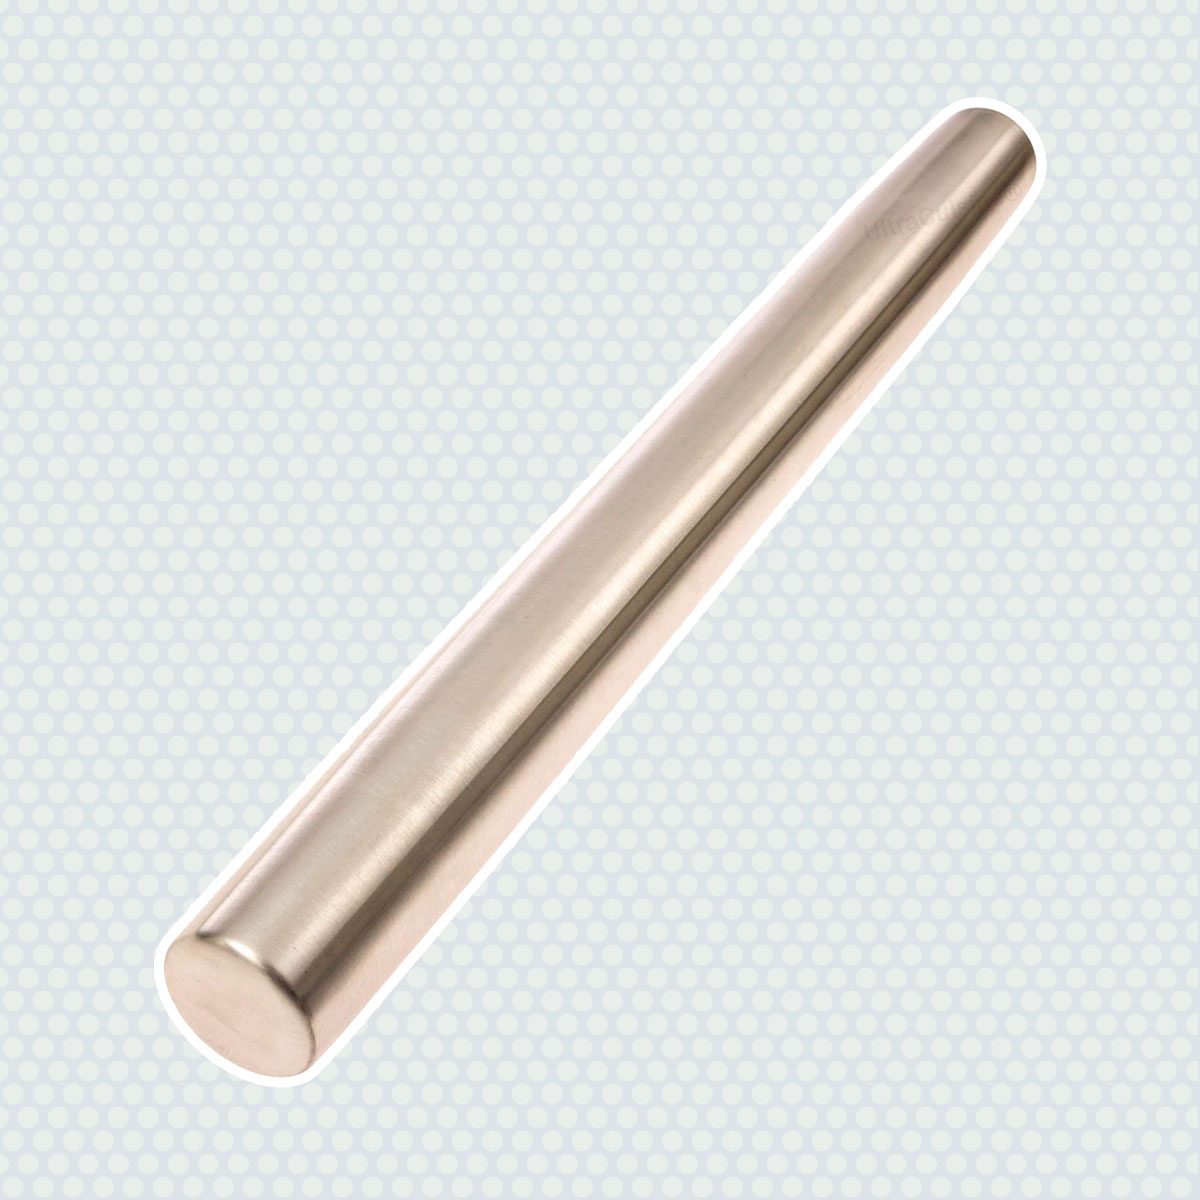 Stainless Steel Rolling Pin